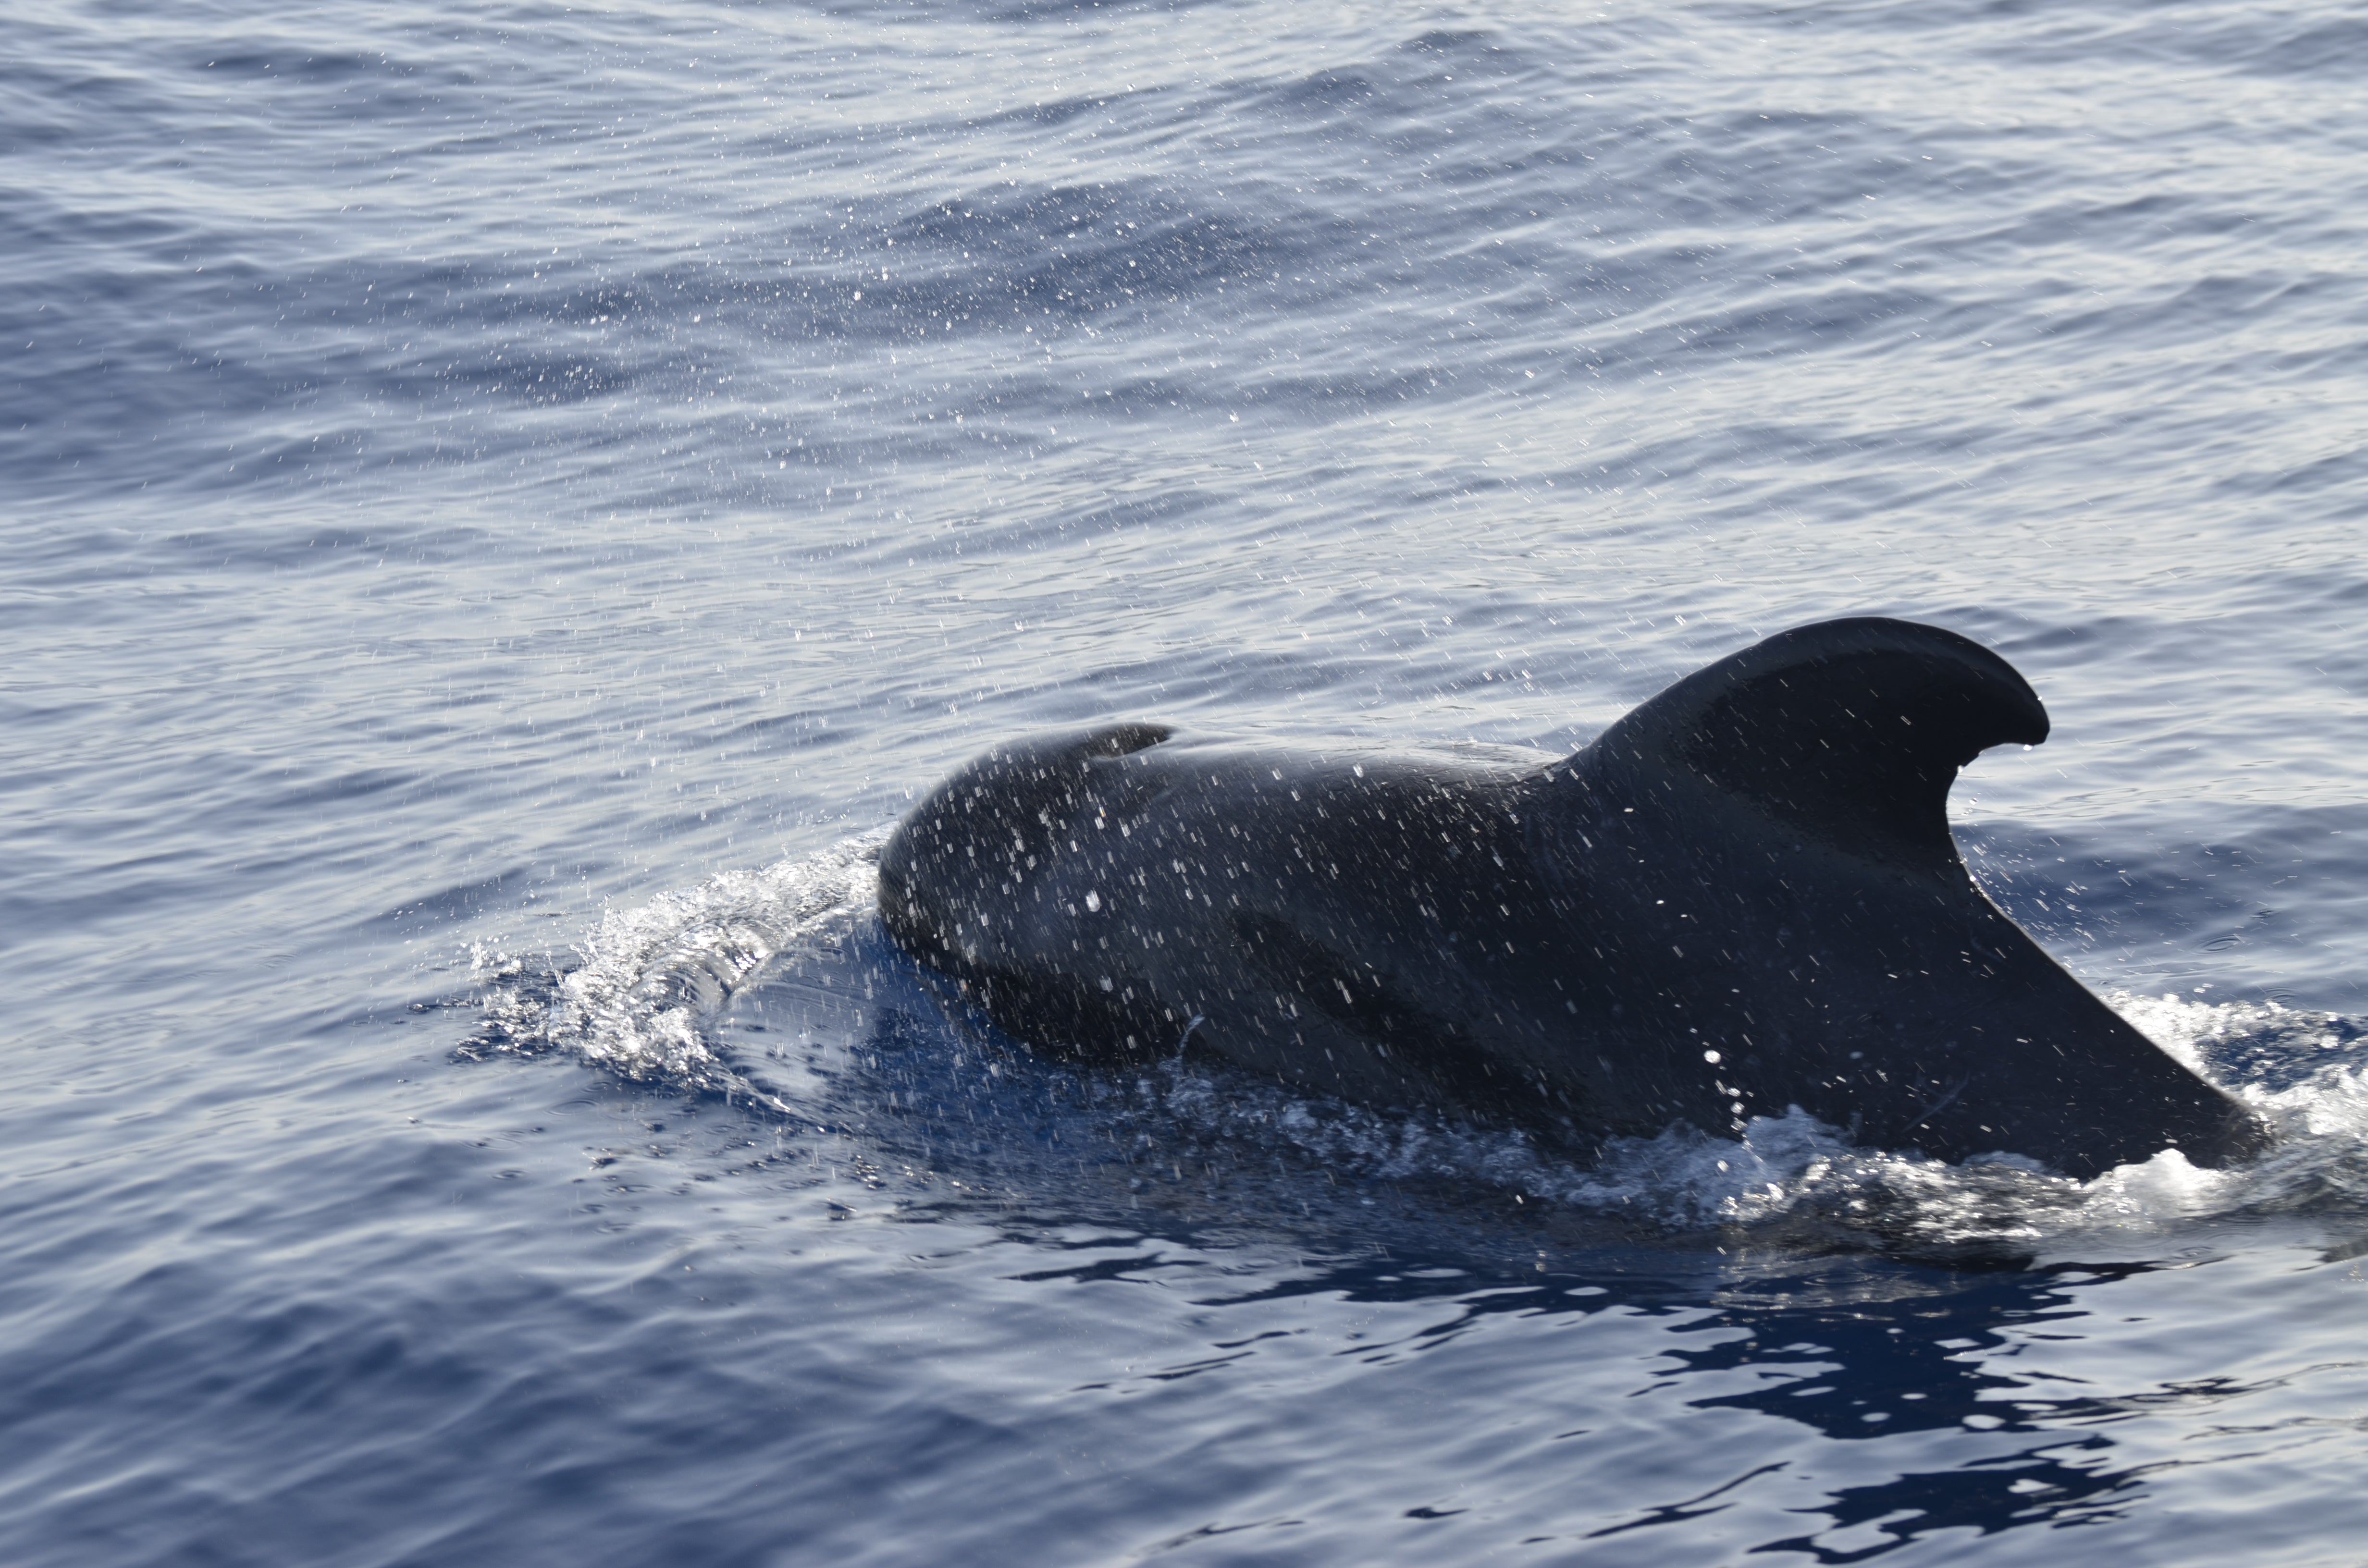 Short-finned pilot whales are rarely found this far north